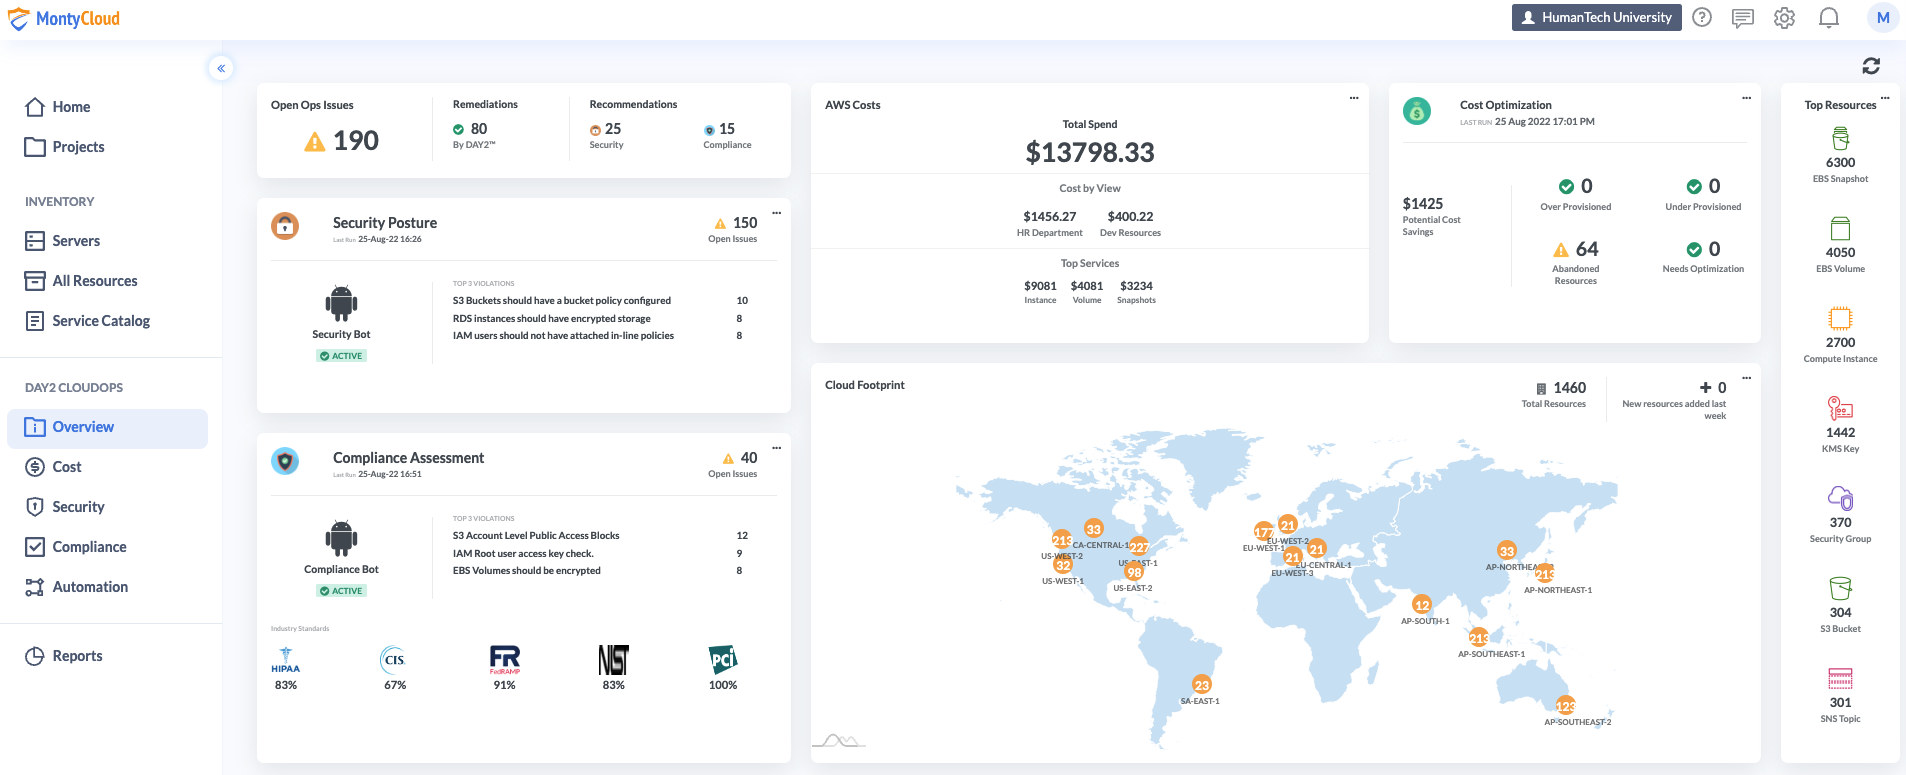 Dashboard View-cost, security, compliance, resources